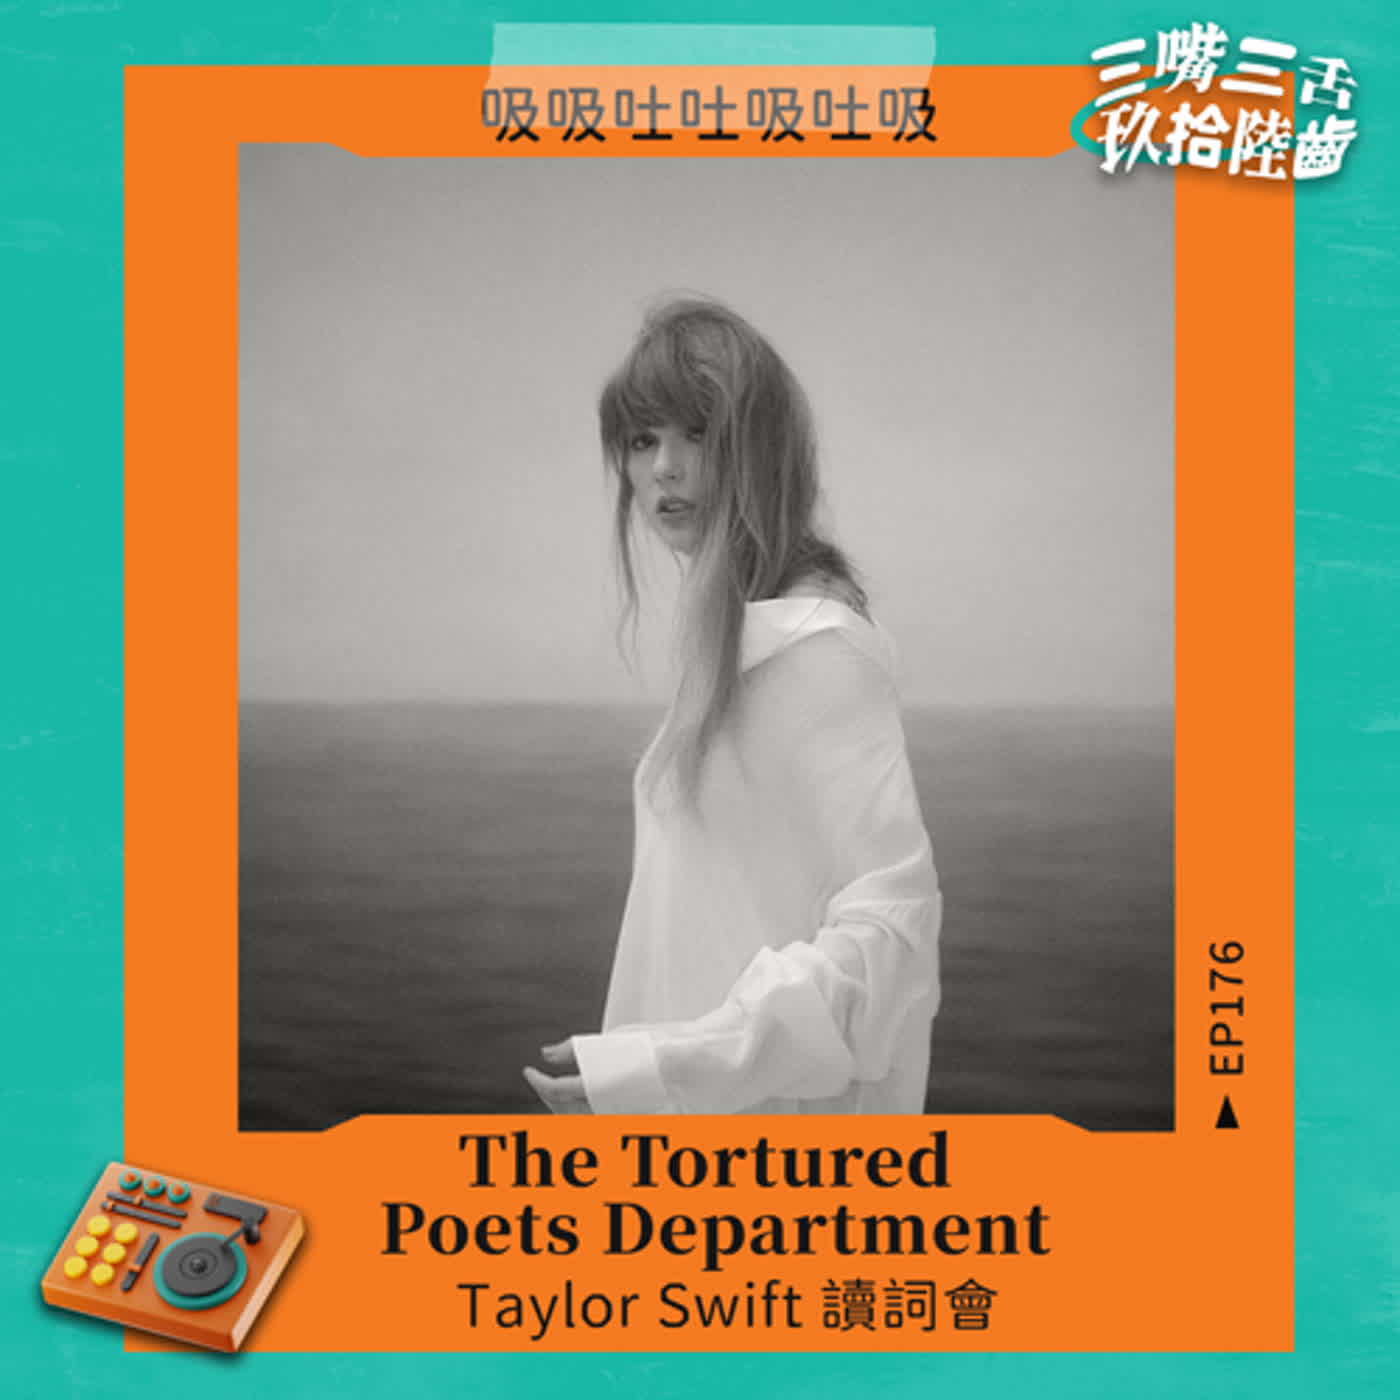 《The Tortured Poets Department》：Taylor Swift 讀詞會｜三嘴呼吸月 EP176